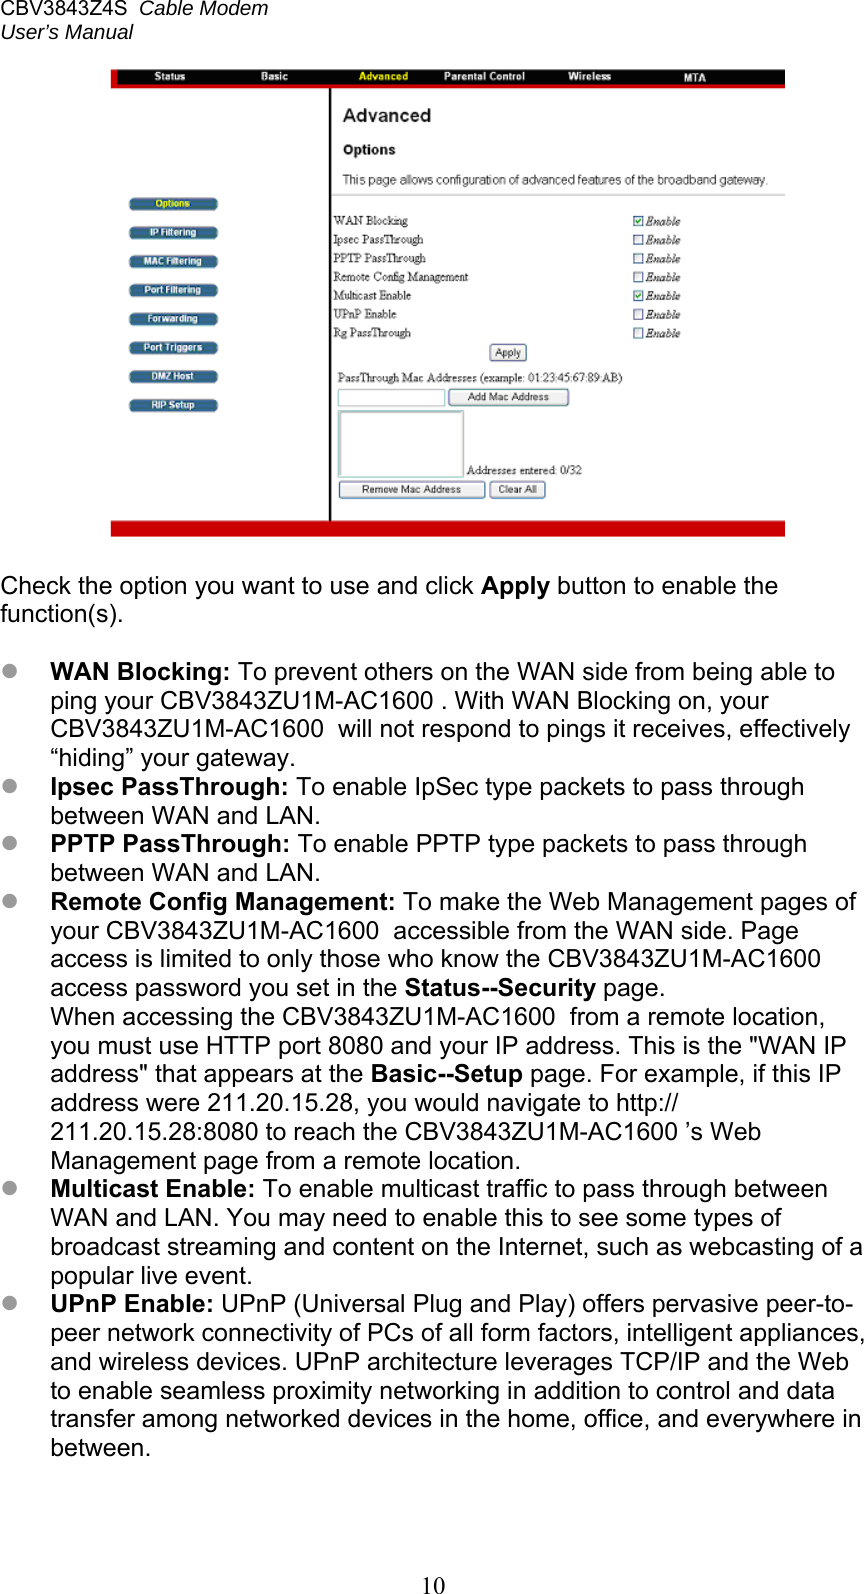 CBV3843Z4S  Cable Modem  User’s Manual   10   Check the option you want to use and click Apply button to enable the function(s).   WAN Blocking: To prevent others on the WAN side from being able to ping your CBV3843ZU1M-AC1600 . With WAN Blocking on, your CBV3843ZU1M-AC1600  will not respond to pings it receives, effectively “hiding” your gateway.  Ipsec PassThrough: To enable IpSec type packets to pass through between WAN and LAN.  PPTP PassThrough: To enable PPTP type packets to pass through between WAN and LAN.  Remote Config Management: To make the Web Management pages of your CBV3843ZU1M-AC1600  accessible from the WAN side. Page access is limited to only those who know the CBV3843ZU1M-AC1600  access password you set in the Status--Security page. When accessing the CBV3843ZU1M-AC1600  from a remote location, you must use HTTP port 8080 and your IP address. This is the &quot;WAN IP address&quot; that appears at the Basic--Setup page. For example, if this IP address were 211.20.15.28, you would navigate to http:// 211.20.15.28:8080 to reach the CBV3843ZU1M-AC1600 ’s Web Management page from a remote location.  Multicast Enable: To enable multicast traffic to pass through between WAN and LAN. You may need to enable this to see some types of broadcast streaming and content on the Internet, such as webcasting of a popular live event.  UPnP Enable: UPnP (Universal Plug and Play) offers pervasive peer-to-peer network connectivity of PCs of all form factors, intelligent appliances, and wireless devices. UPnP architecture leverages TCP/IP and the Web to enable seamless proximity networking in addition to control and data transfer among networked devices in the home, office, and everywhere in between.  